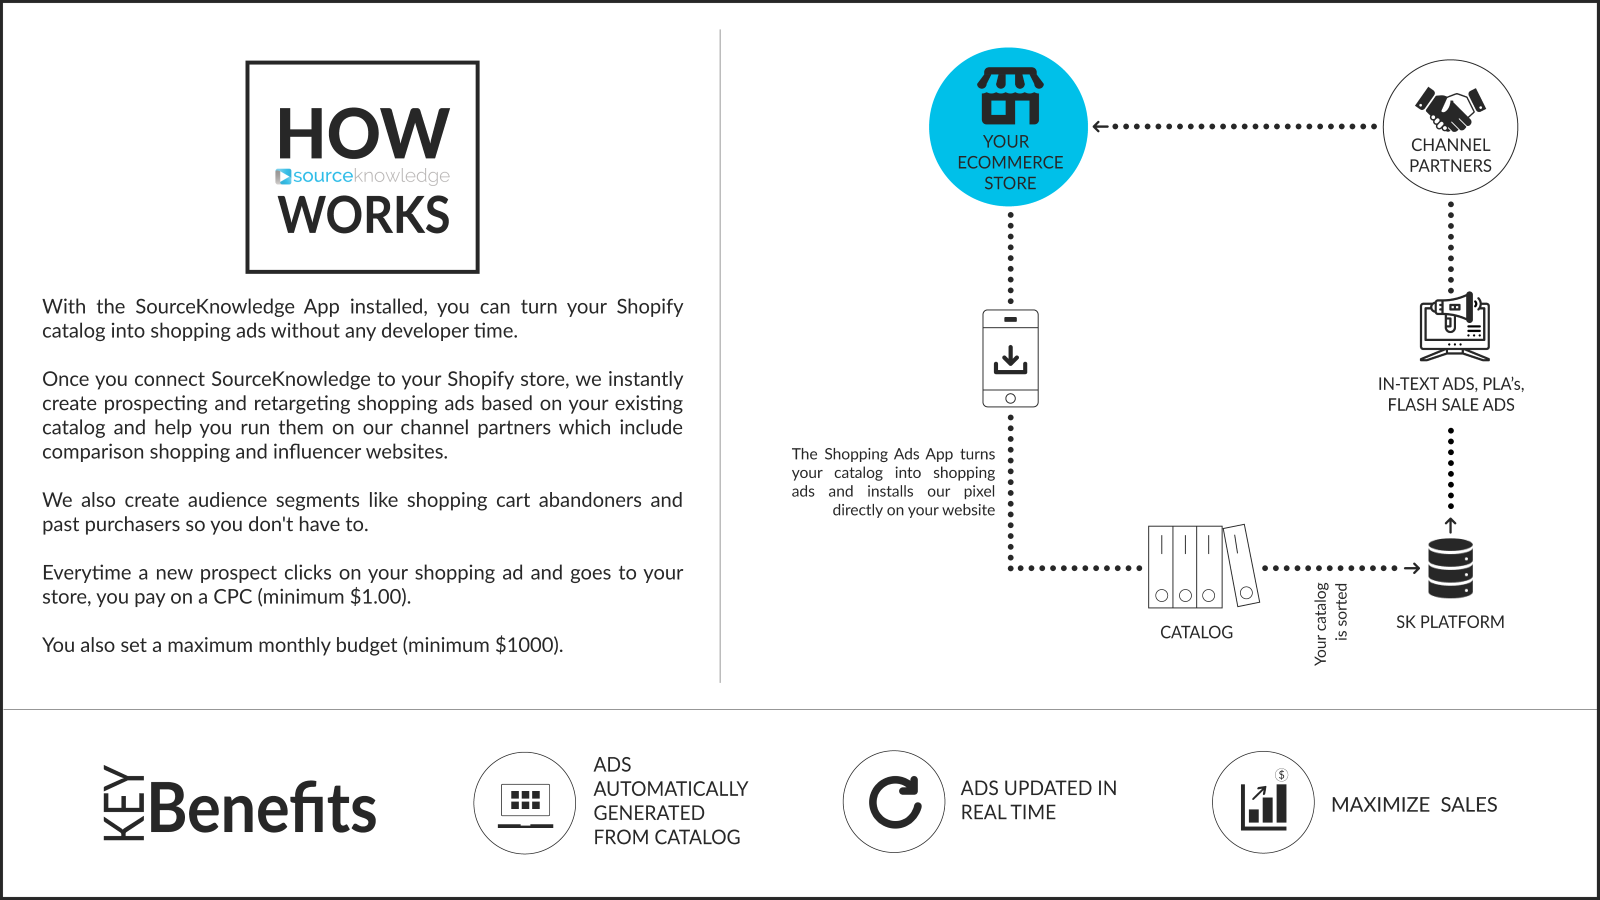 How SourceKnowledge Works